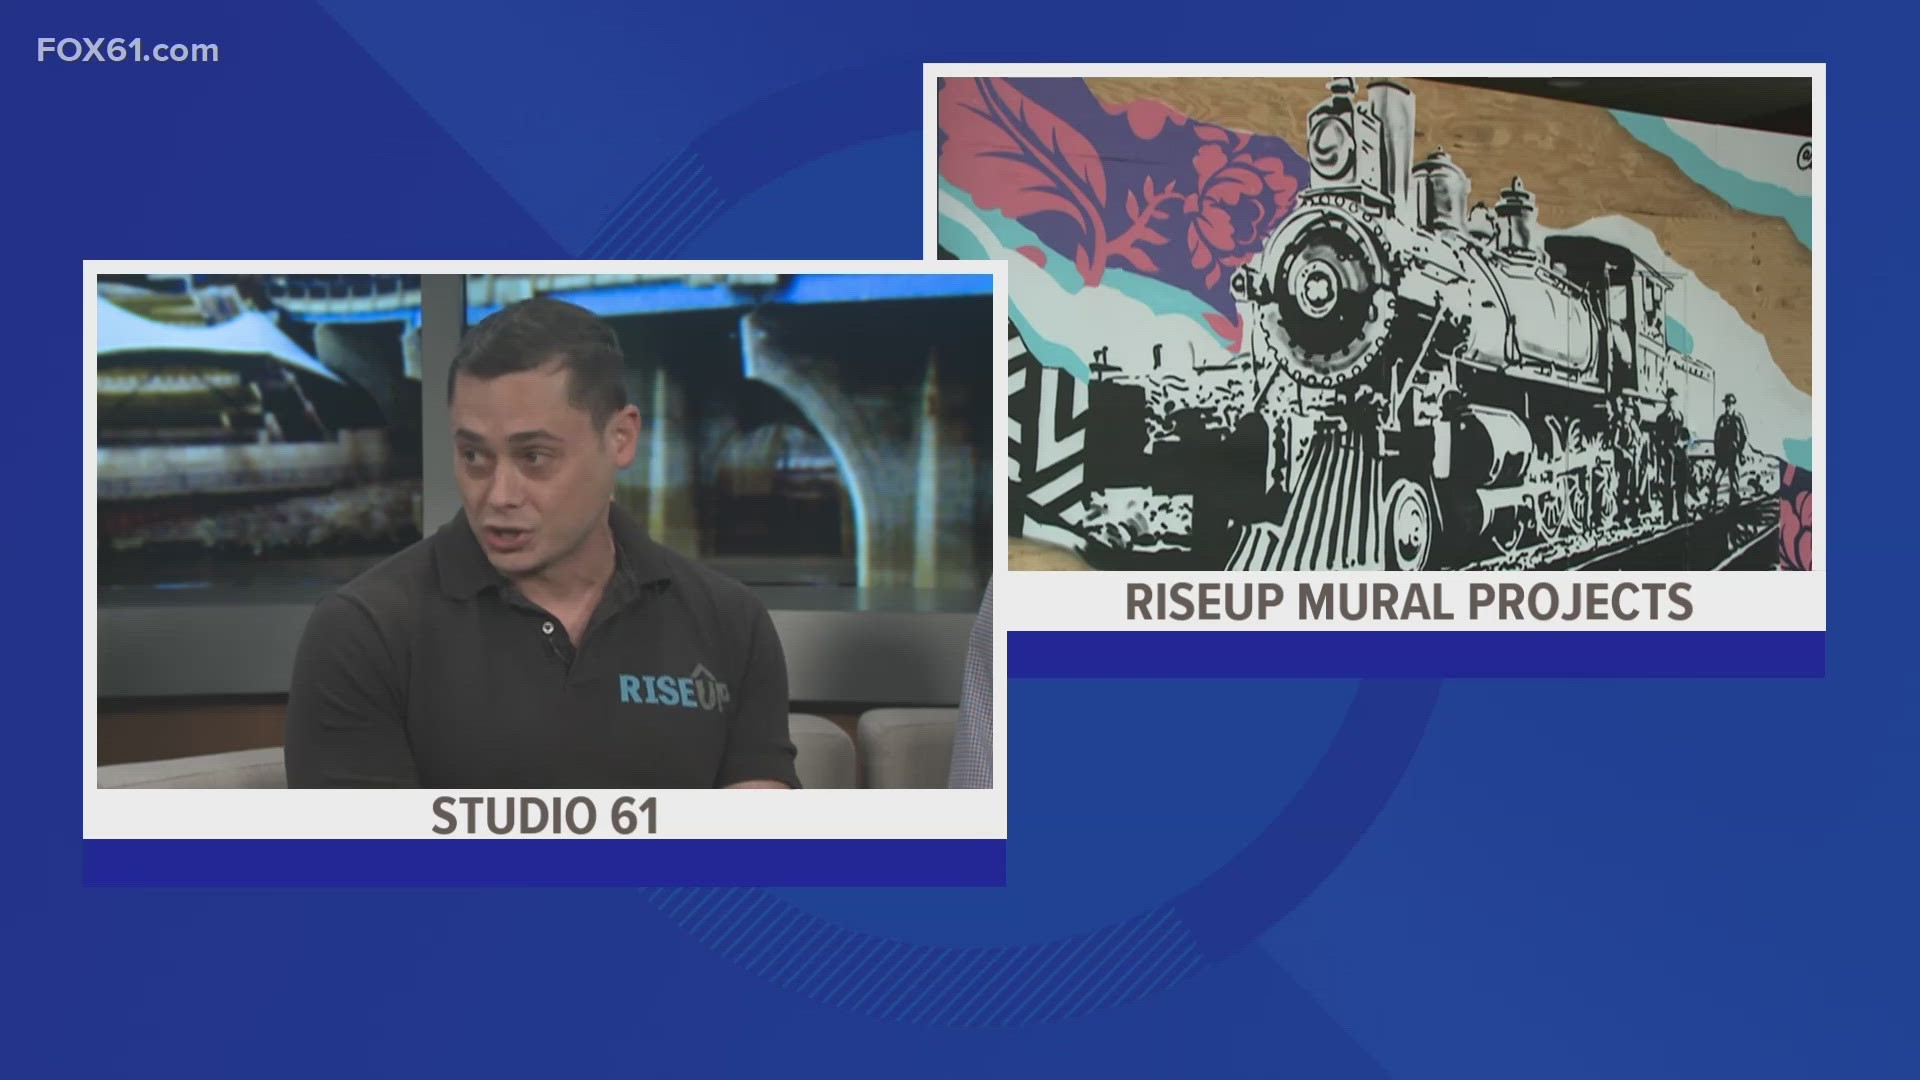 Matt Conway from RiseUp group and Harry Amadasun, director of East Hartford Murals Program, talk about the latest projects promoting local art.